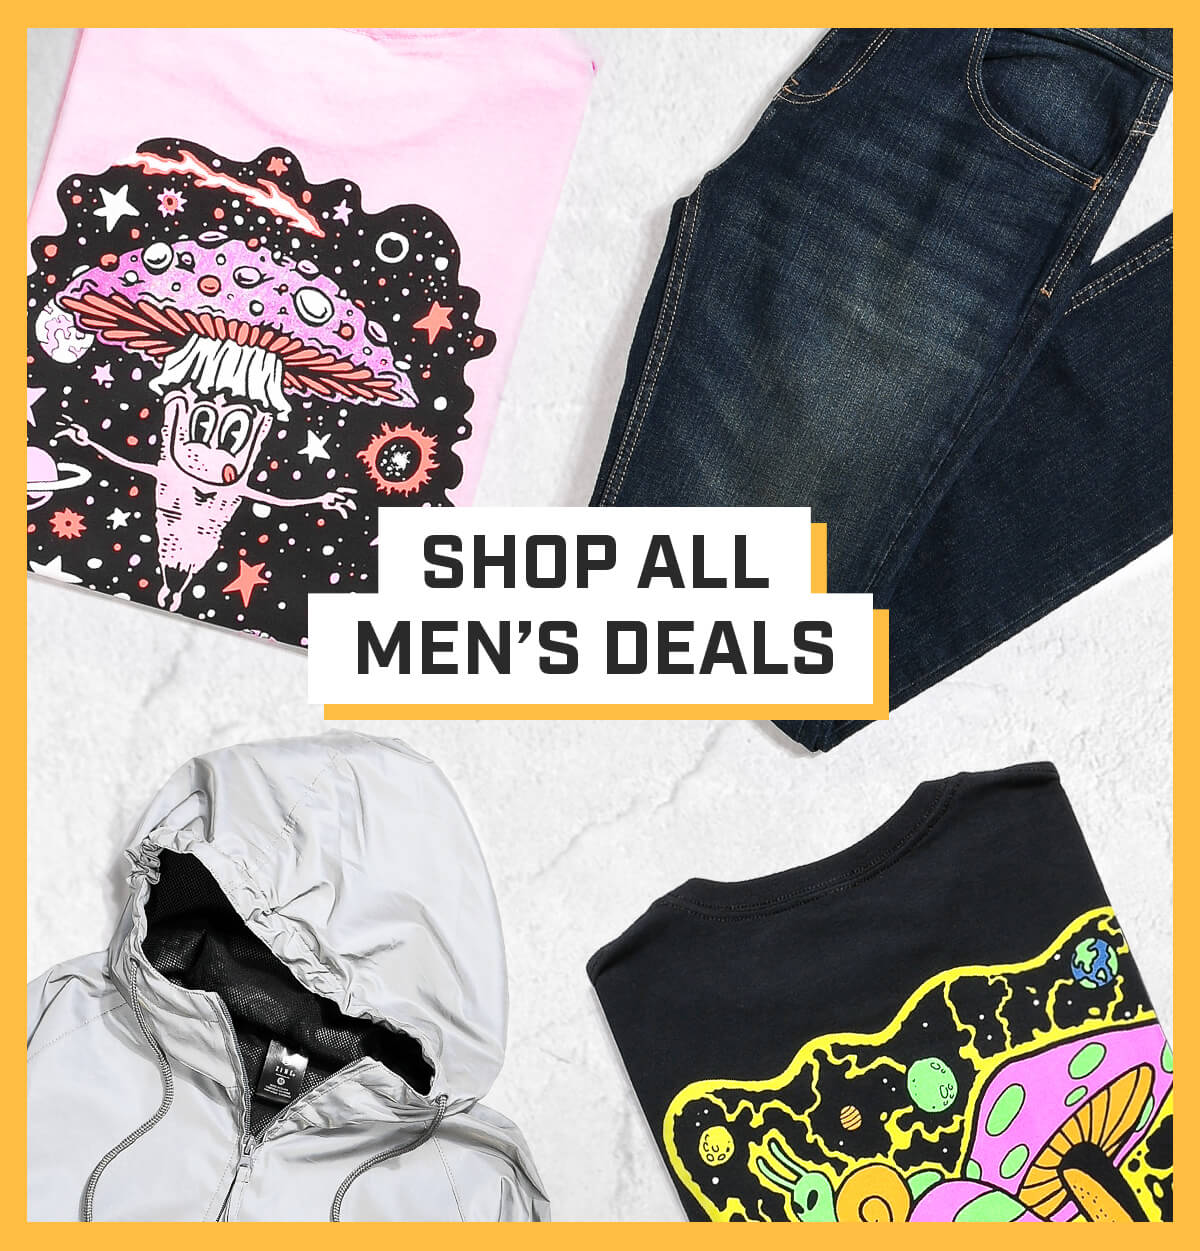 MEN'S PACKAGE DEALS - SAVE UP TO 25% WHEN YOU BUY ITEMS TOGETHER